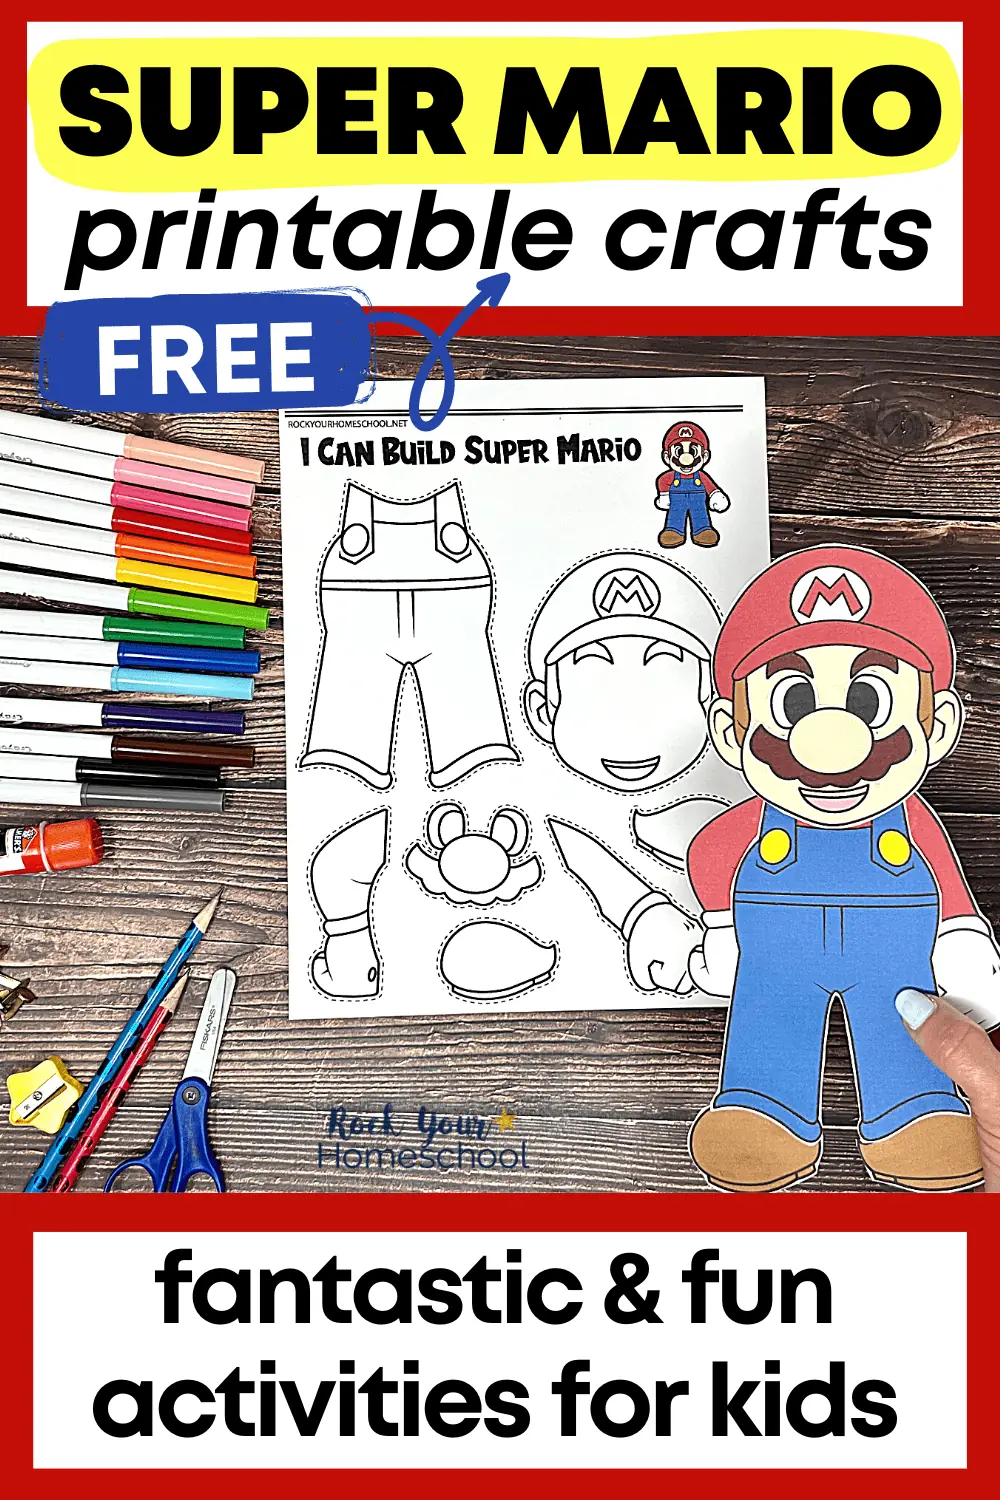 Super Mario Crafts for Fun Activities for Kids (20 Free)